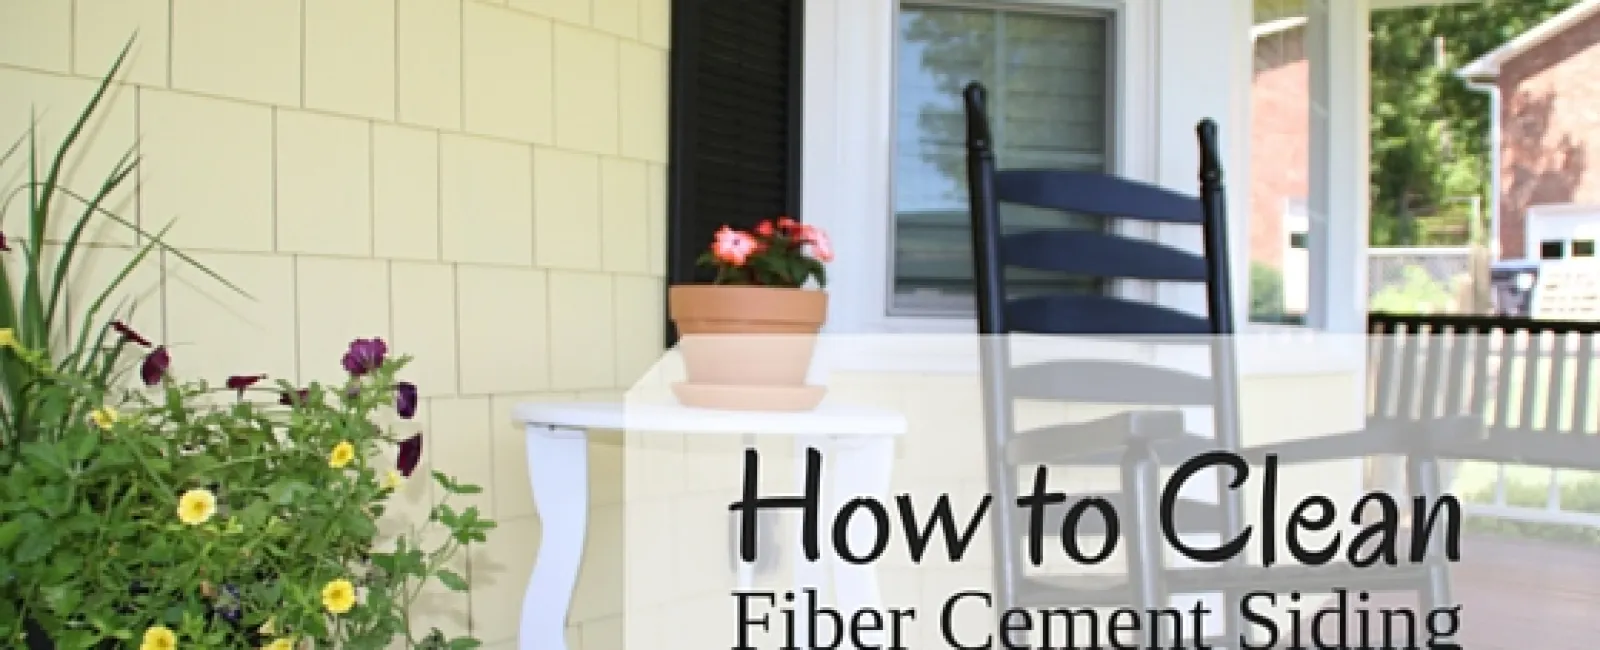 How to Clean Fiber Cement Siding